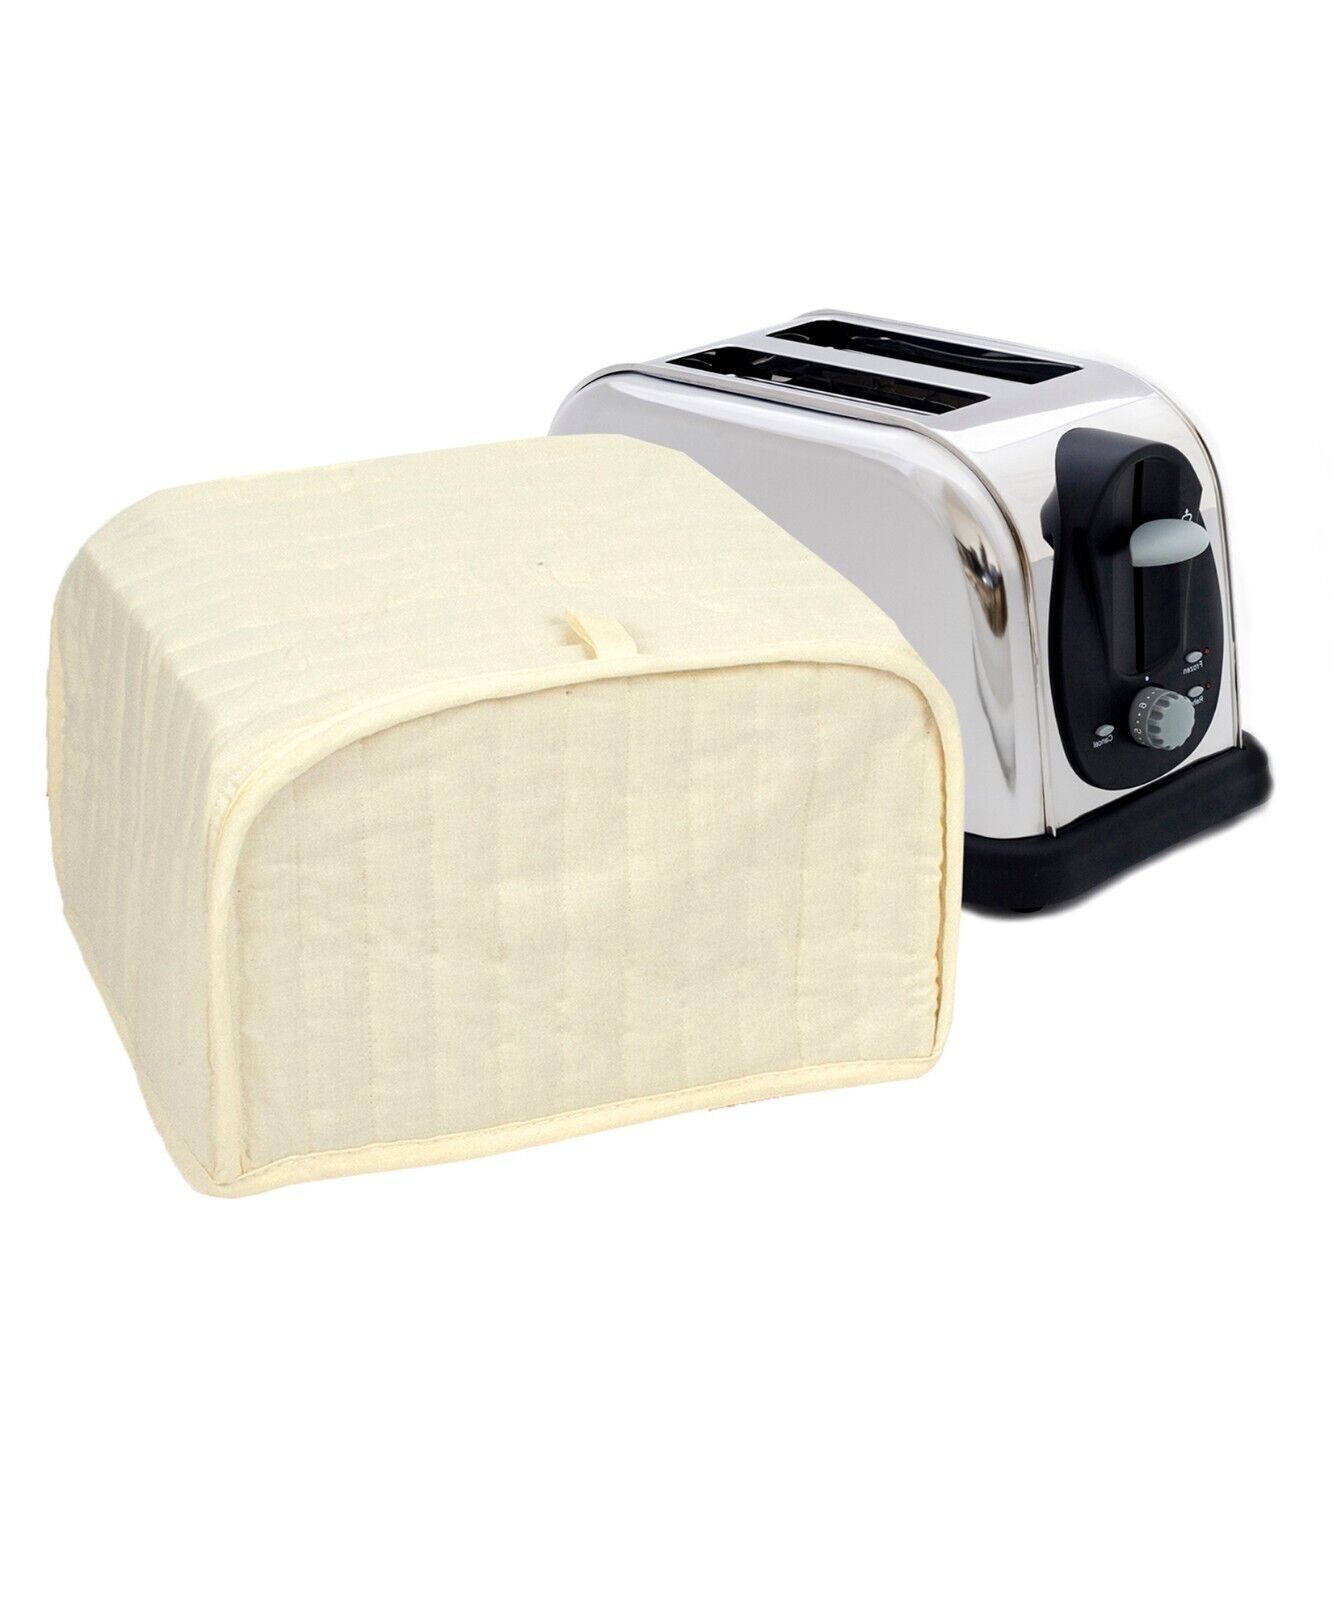 RITZ Two-Slice Toaster Kitchen Appliance Cover